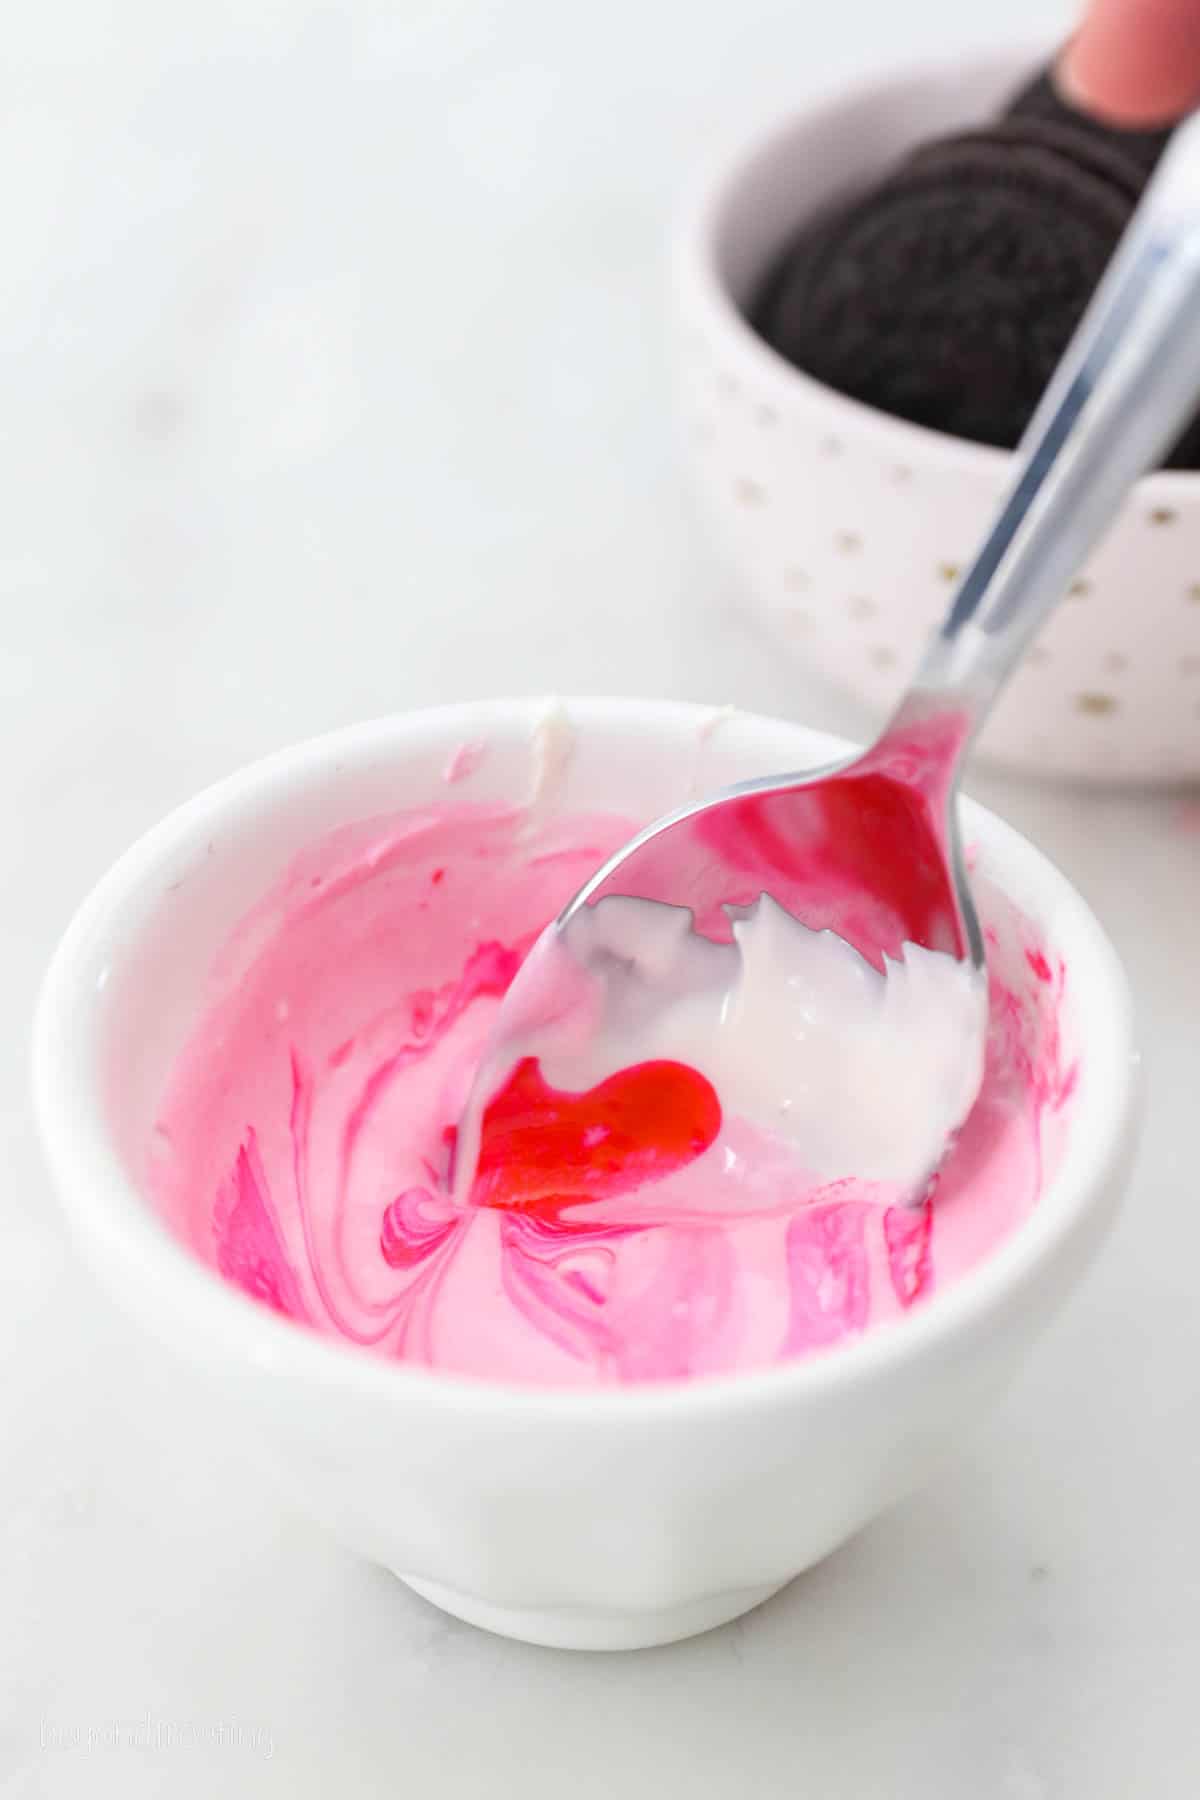 A spoon mixing pink color into white chocolate